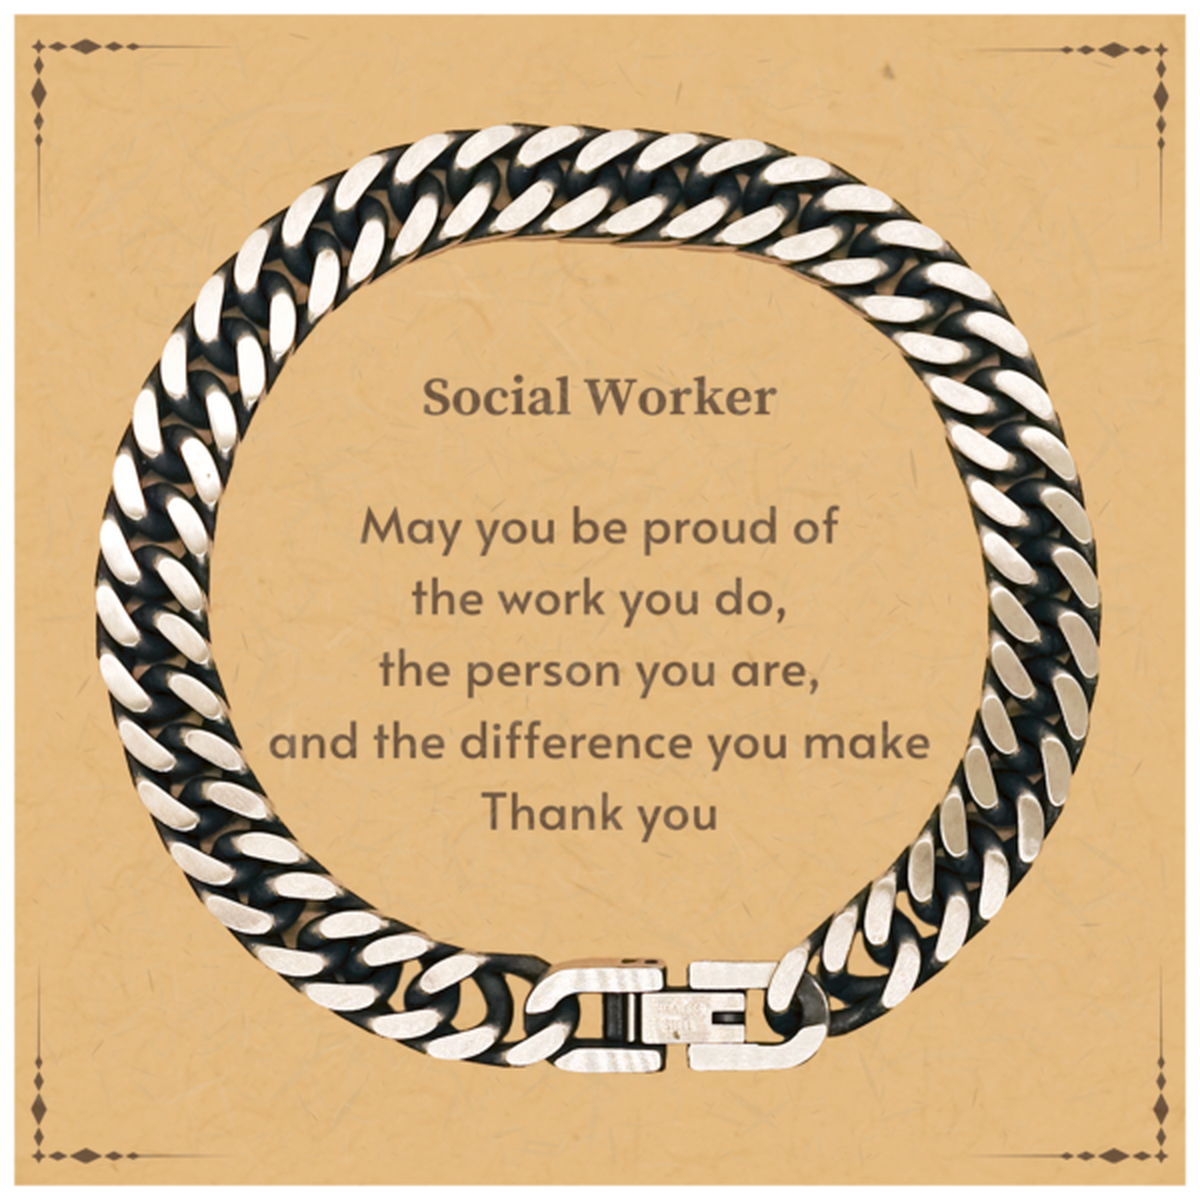 Heartwarming Cuban Link Chain Bracelet Retirement Coworkers Gifts for Social Worker, Social Worker May You be proud of the work you do, the person you are Gifts for Boss Men Women Friends